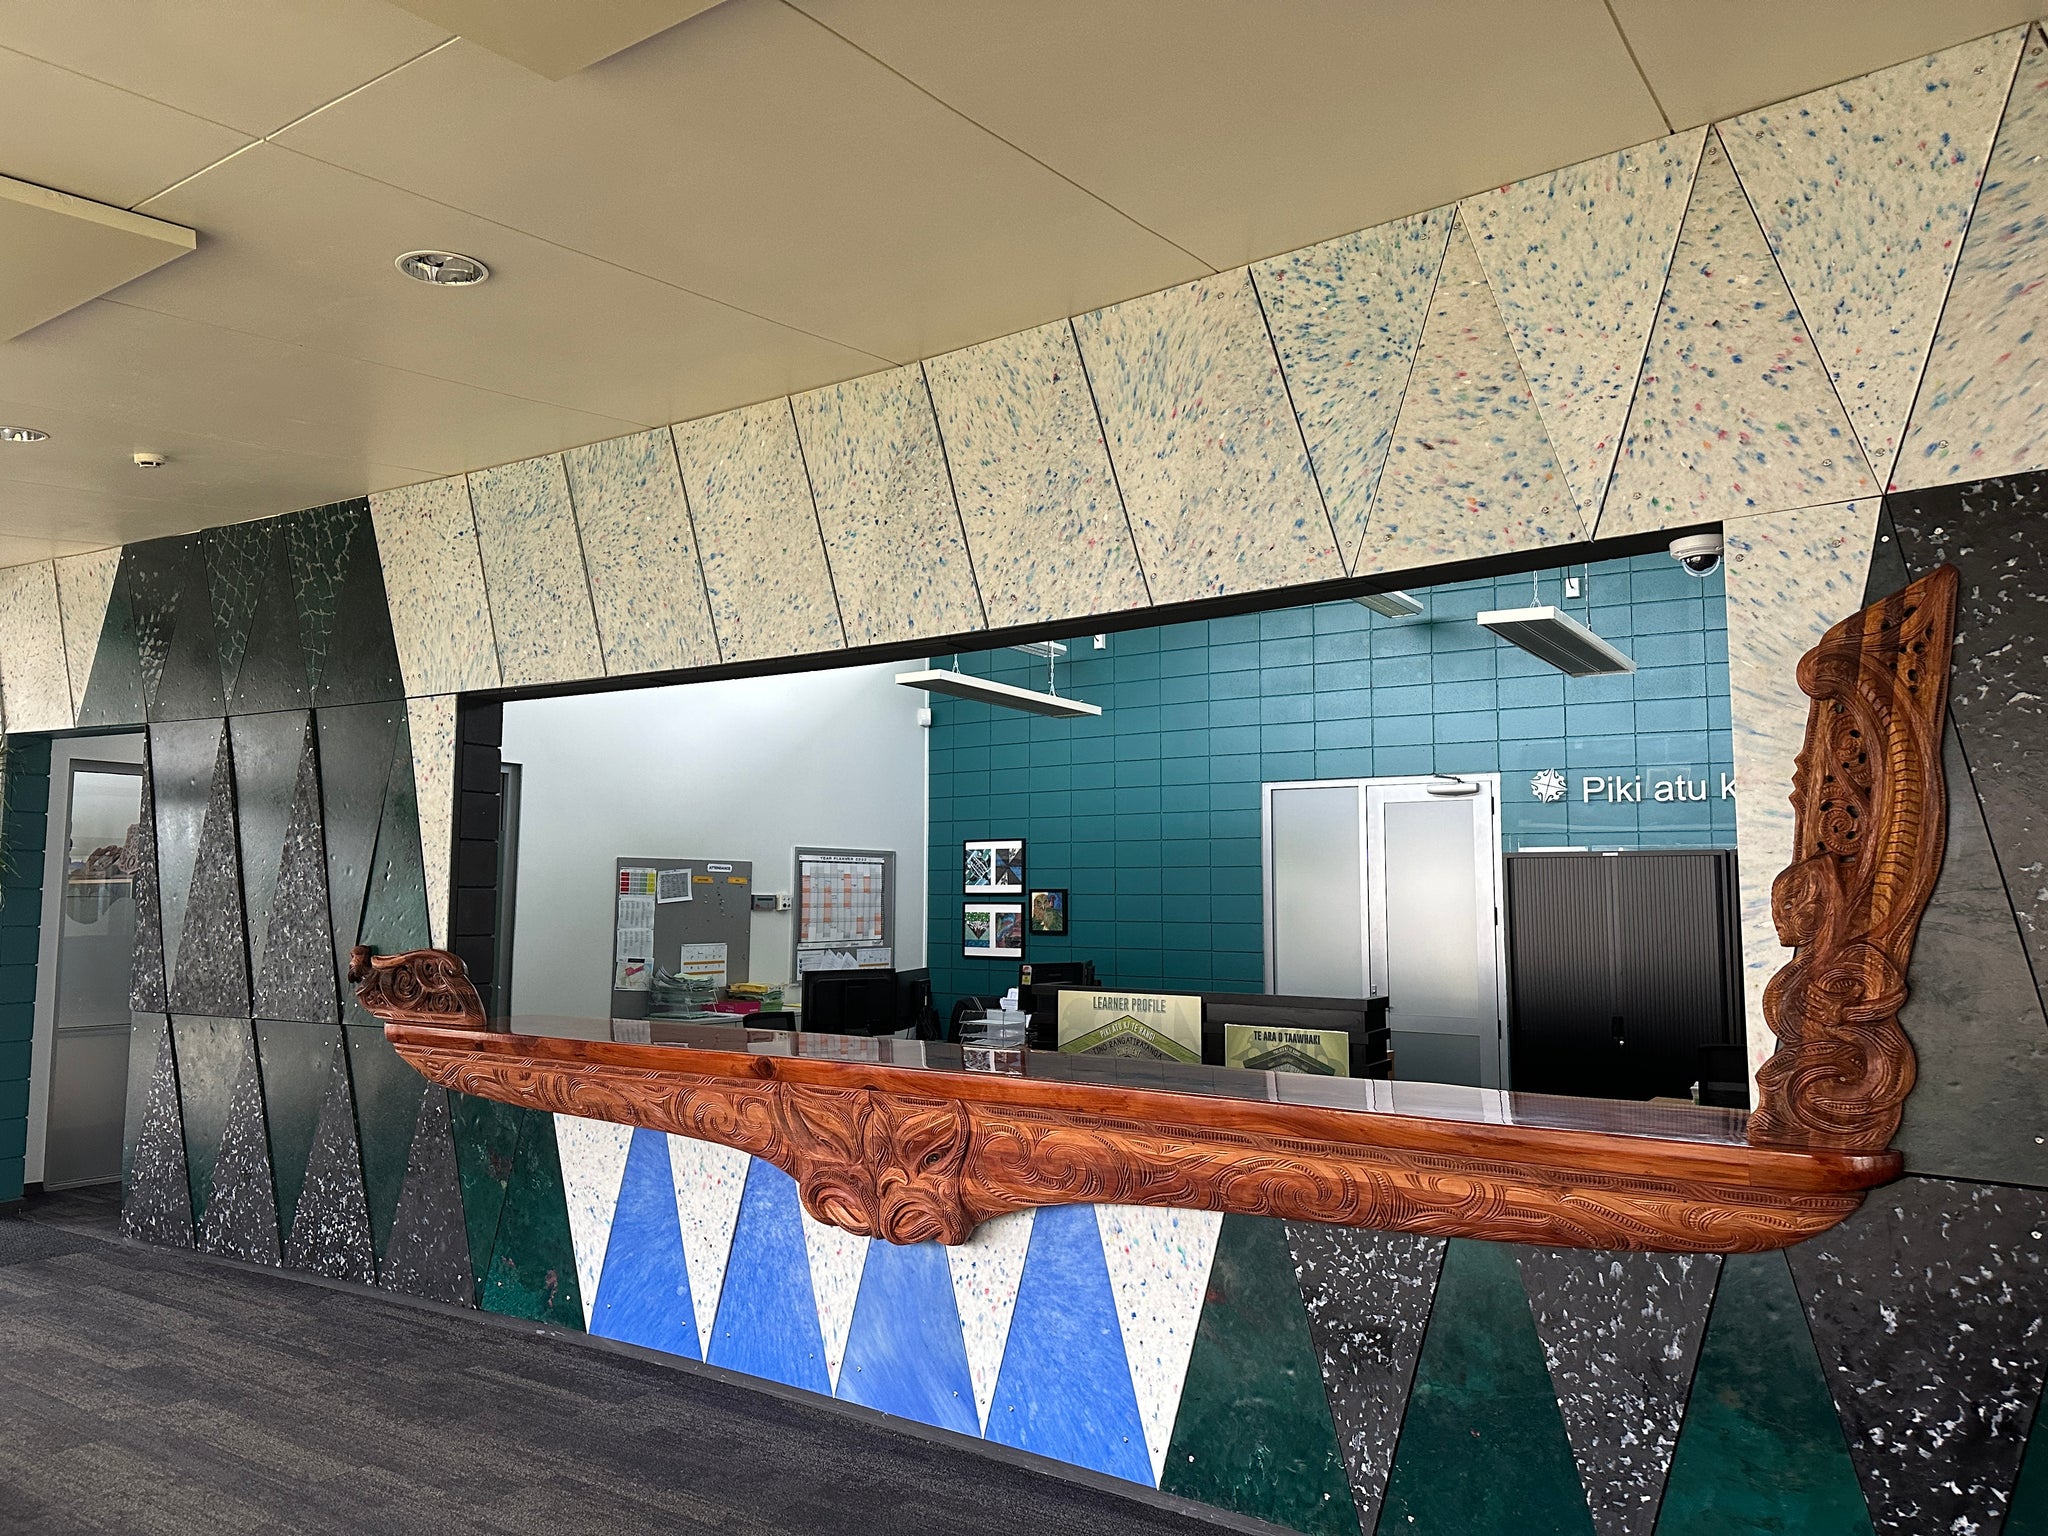 A celebration of Māori culture and circular economy in this South Auckland school fit out.